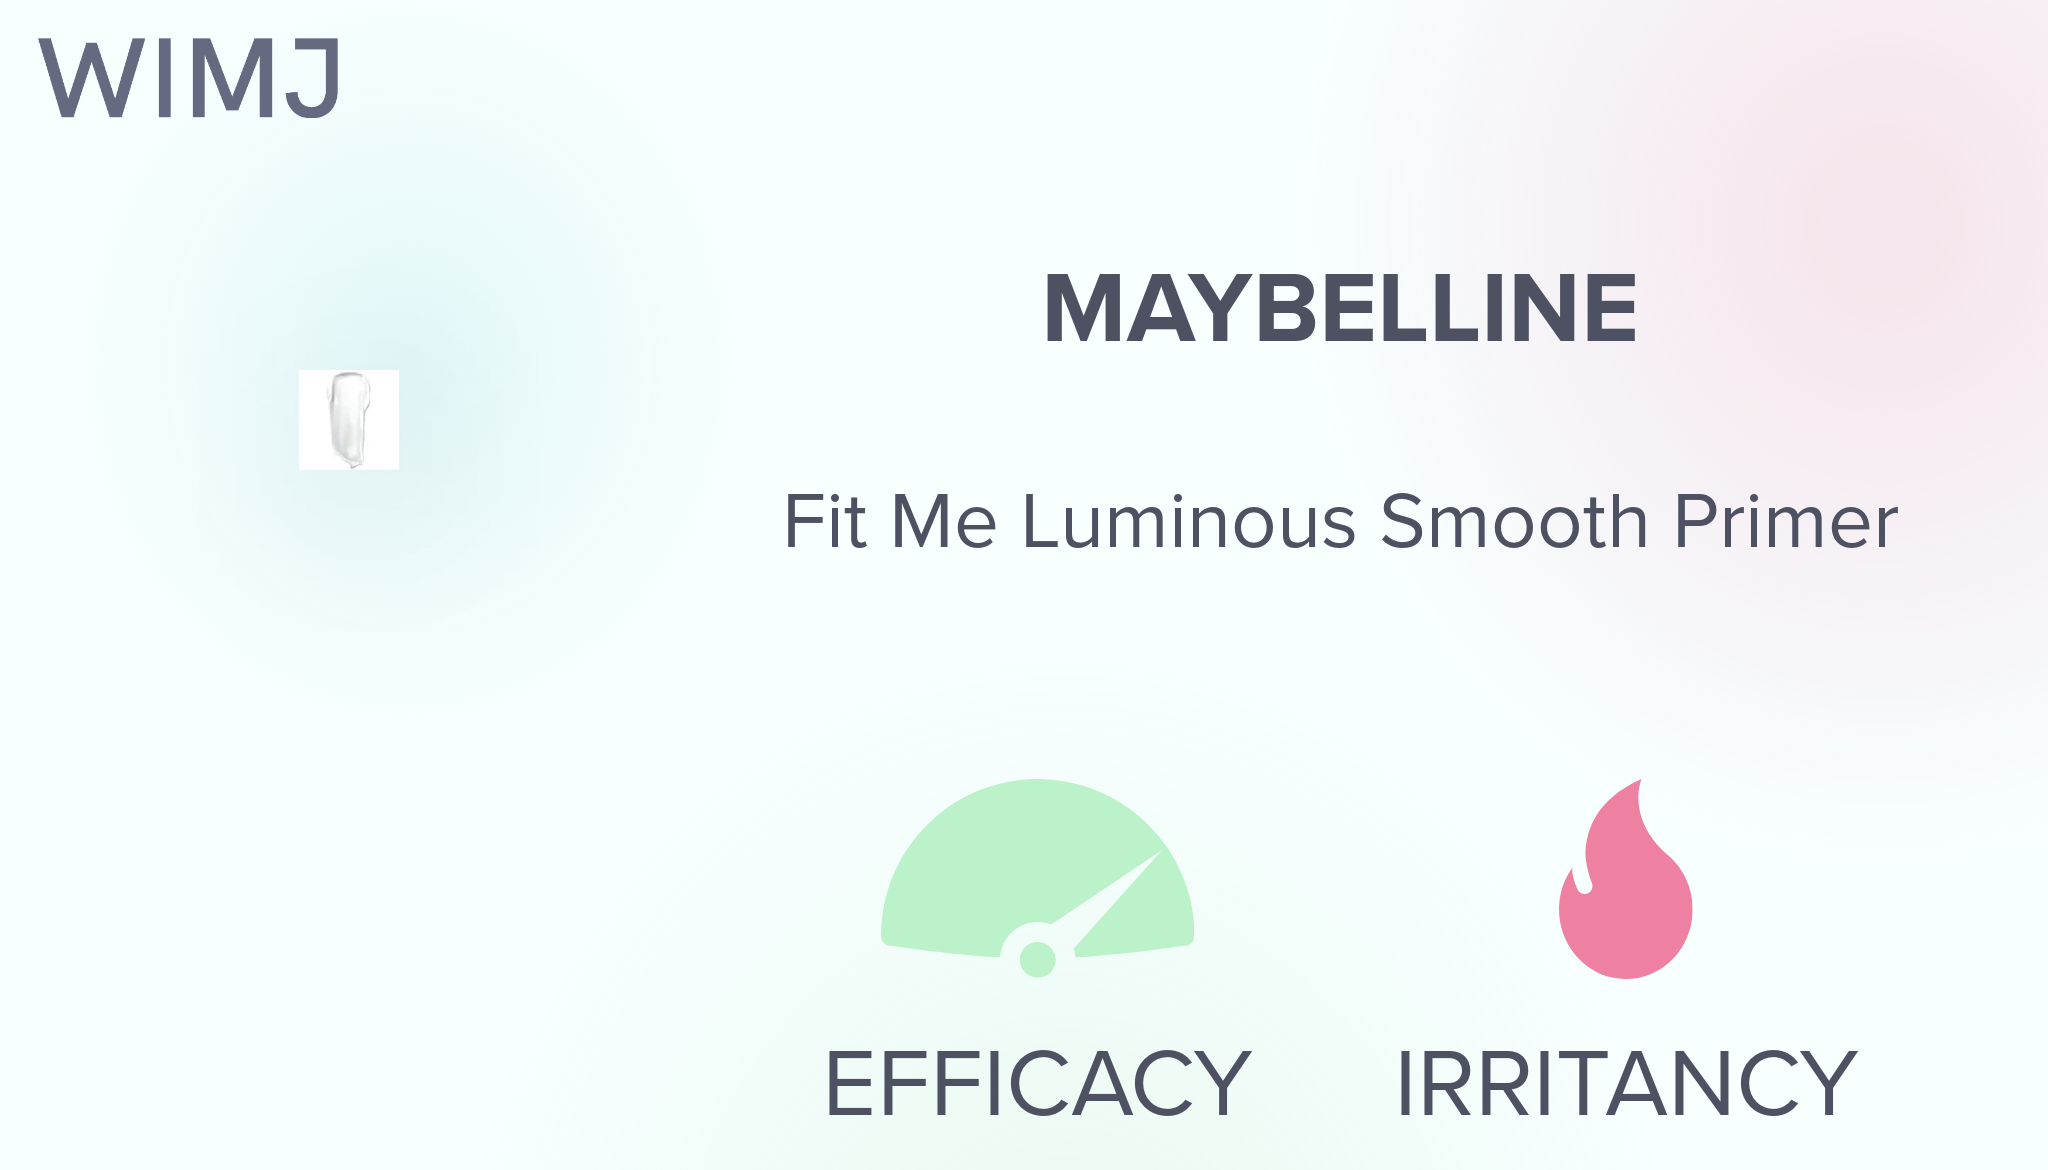 Review: Maybelline - Fit Me Luminous Smooth Primer - WIMJ